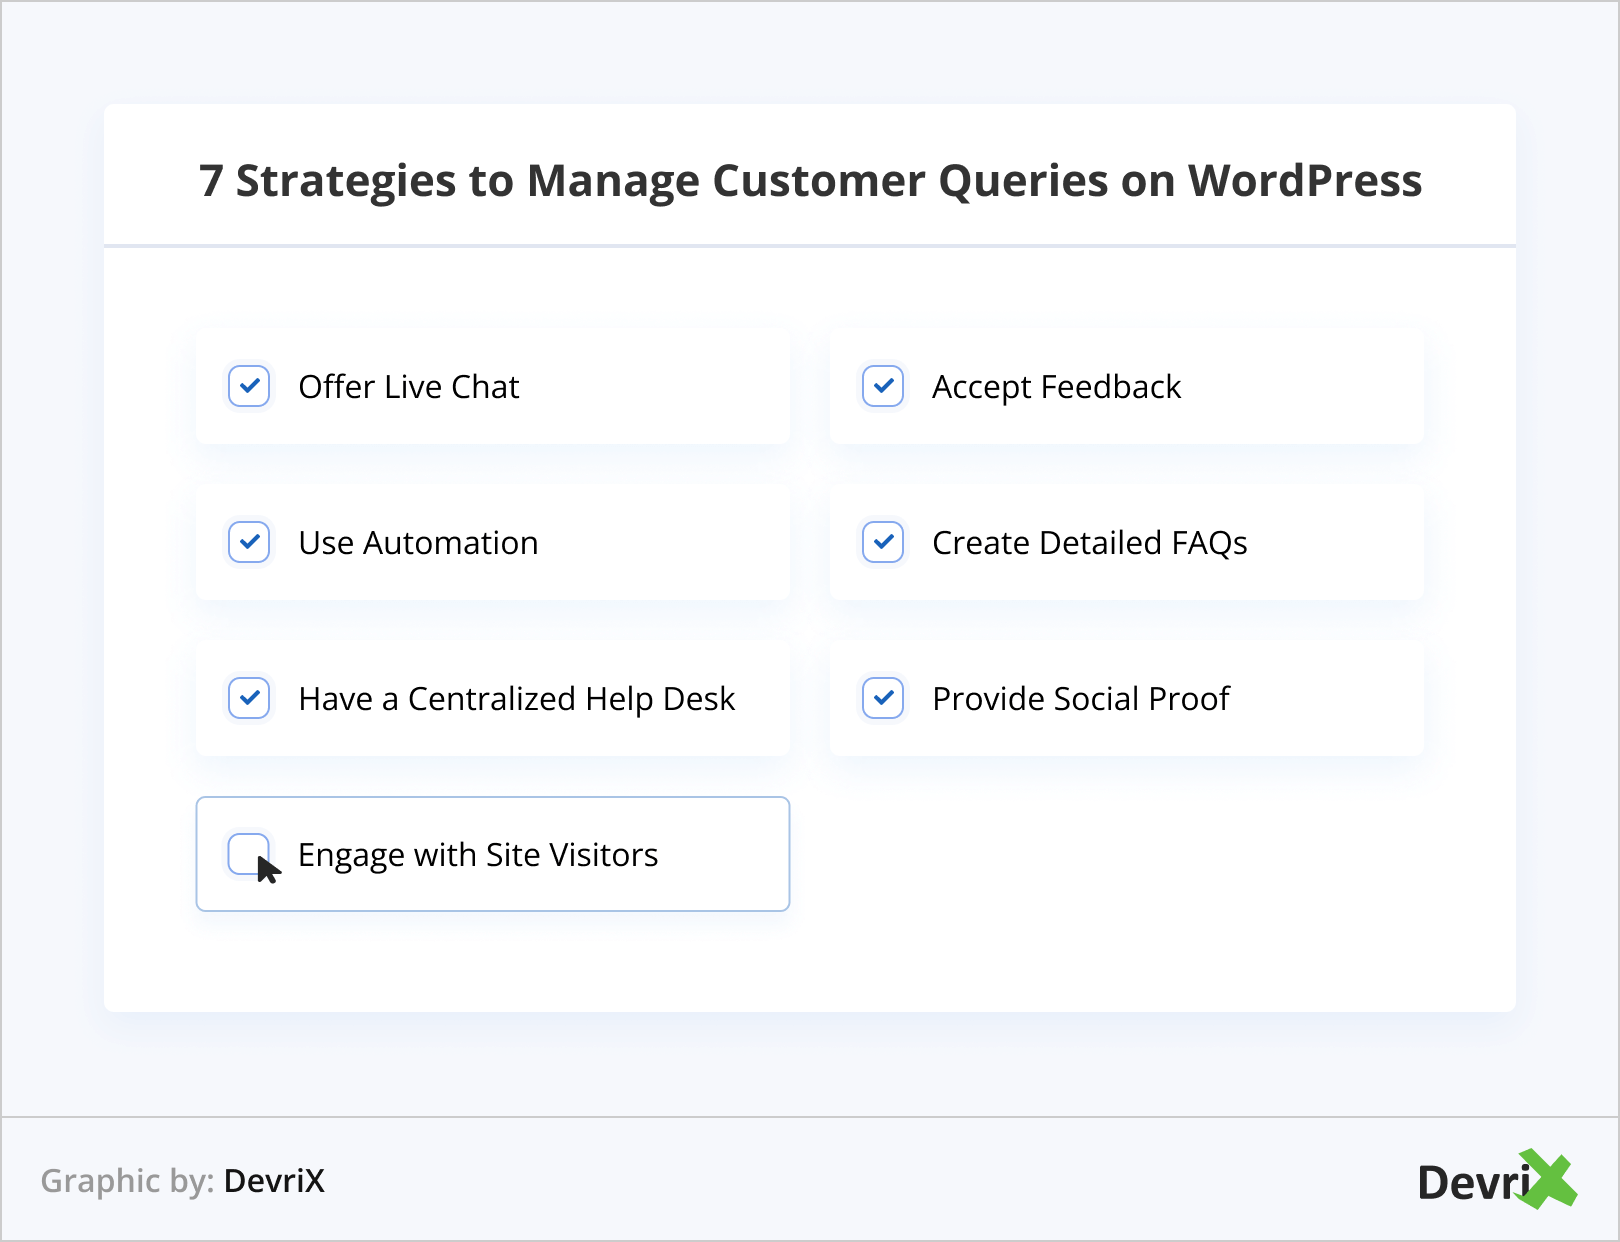 7 Strategies to Manage Customer Queries on WordPress